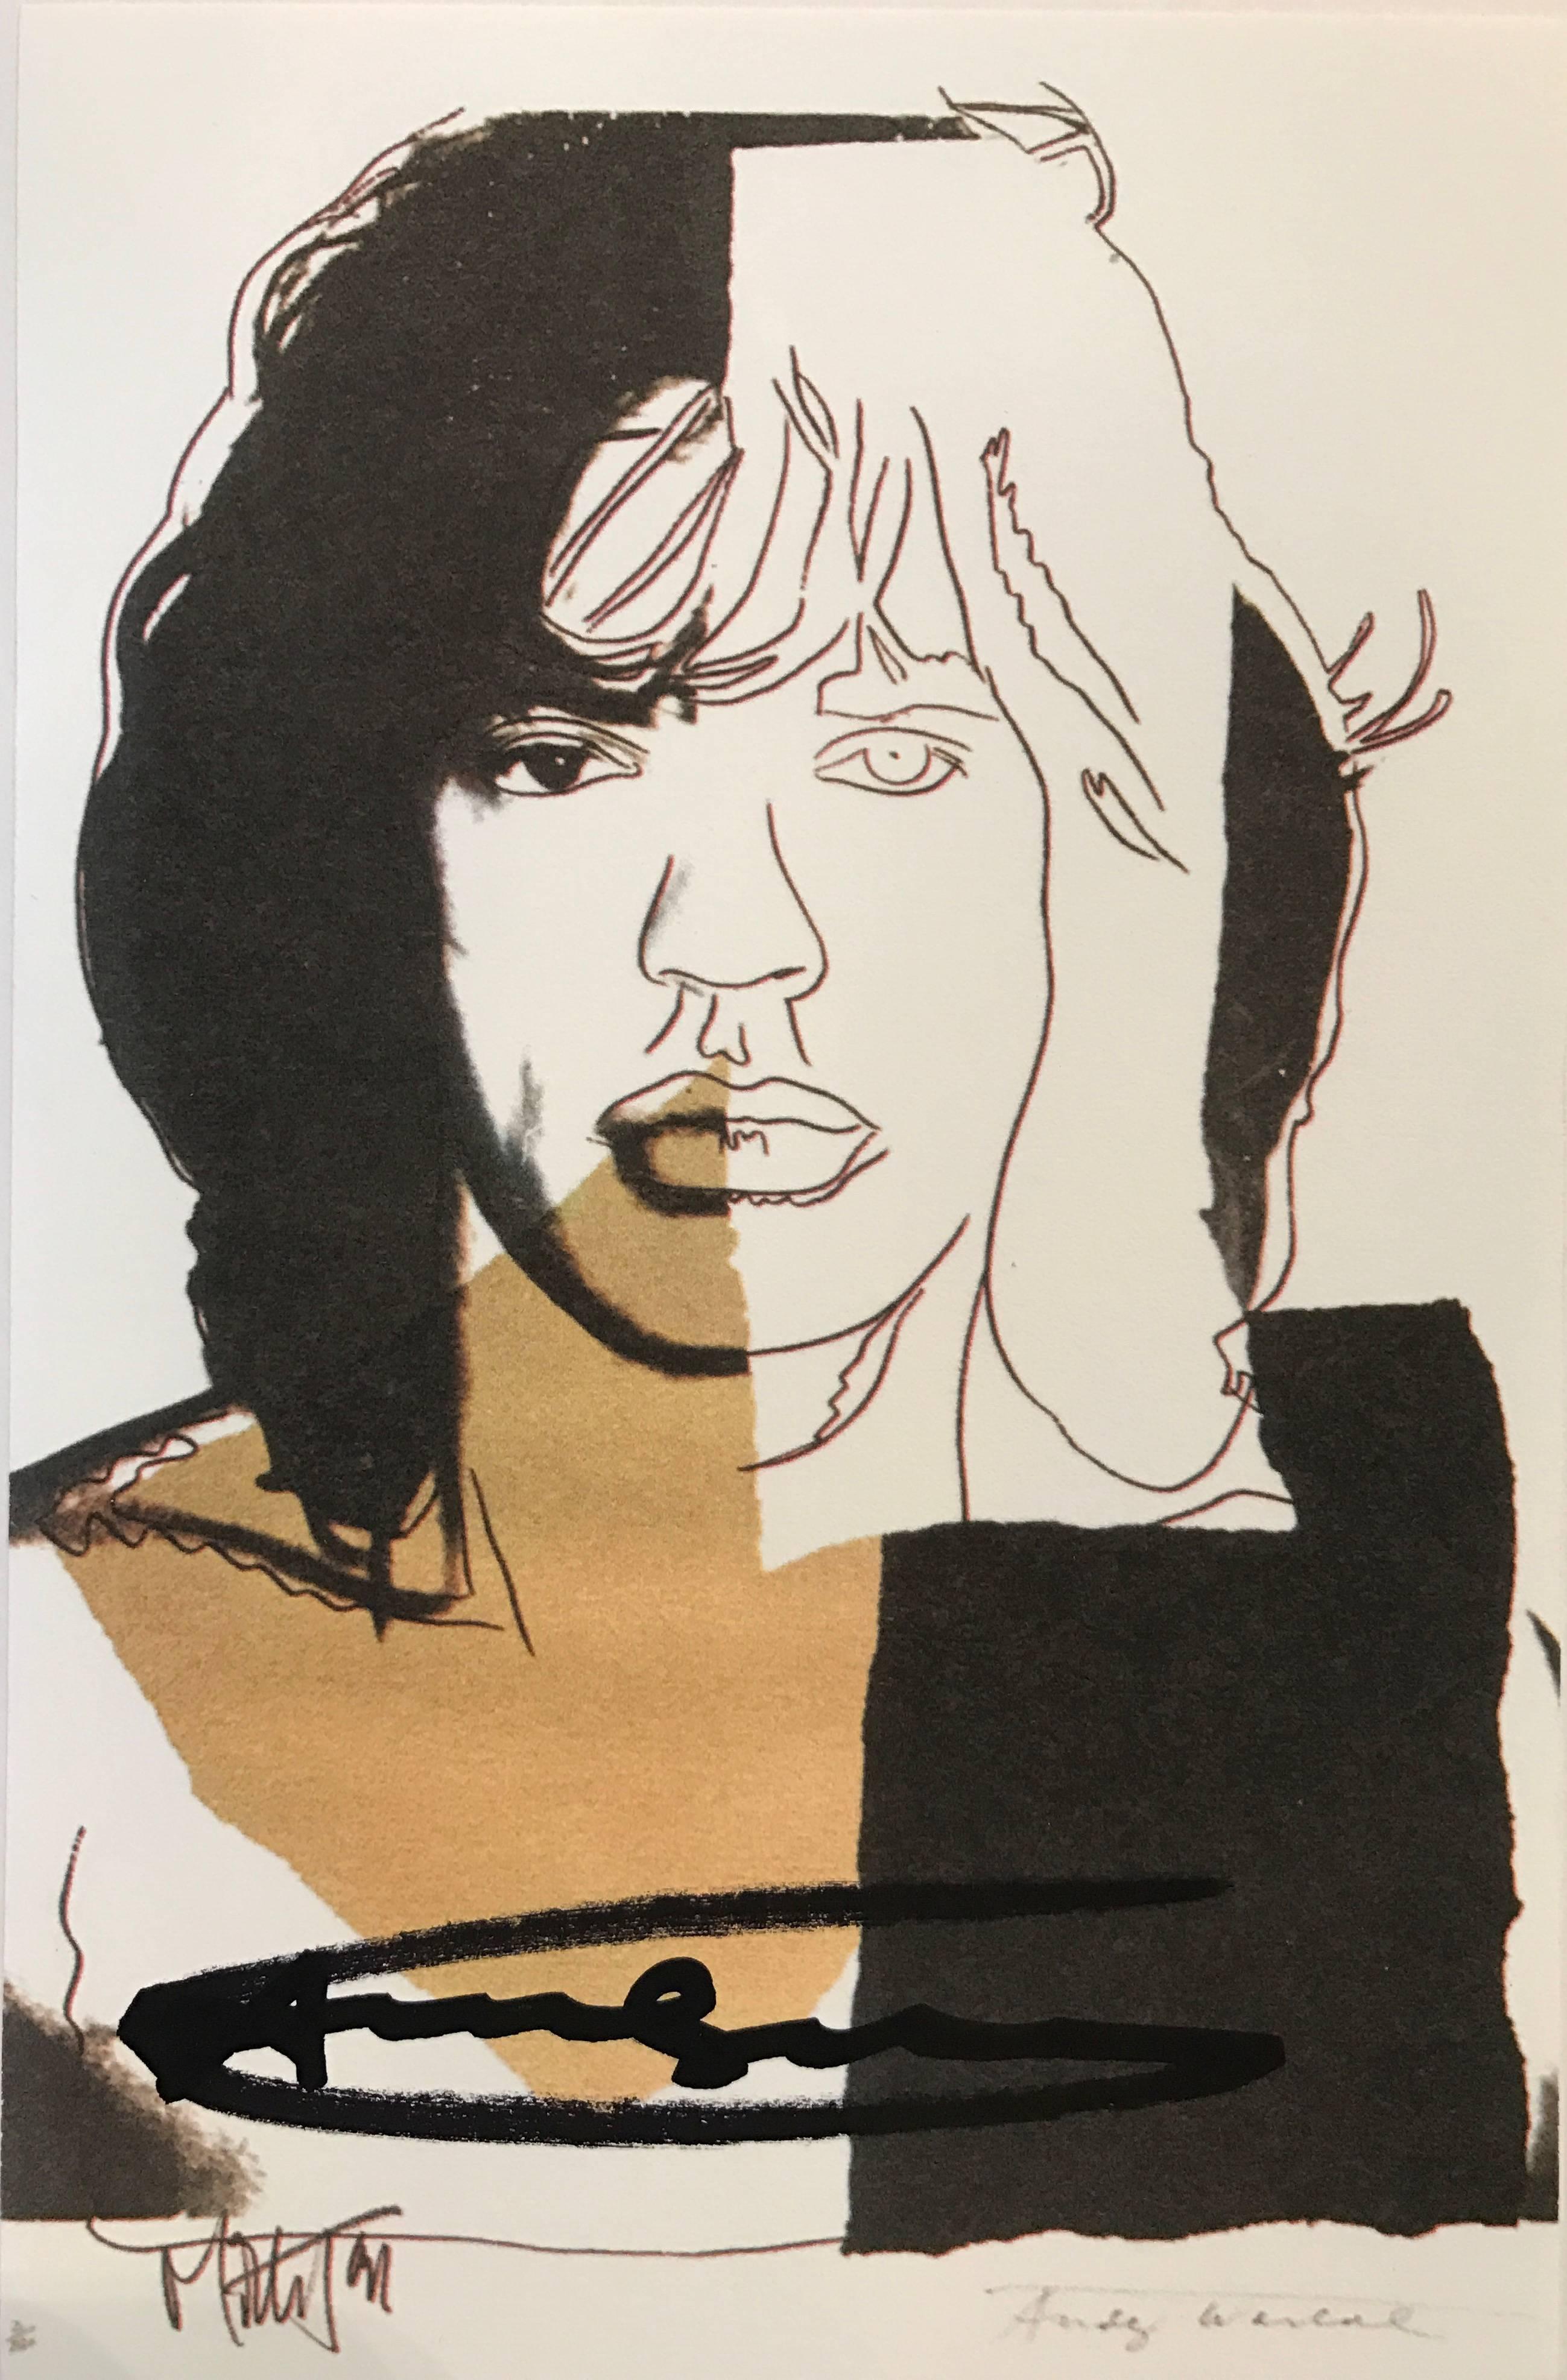 Mick Jagger 1975 - Print by (after) Andy Warhol